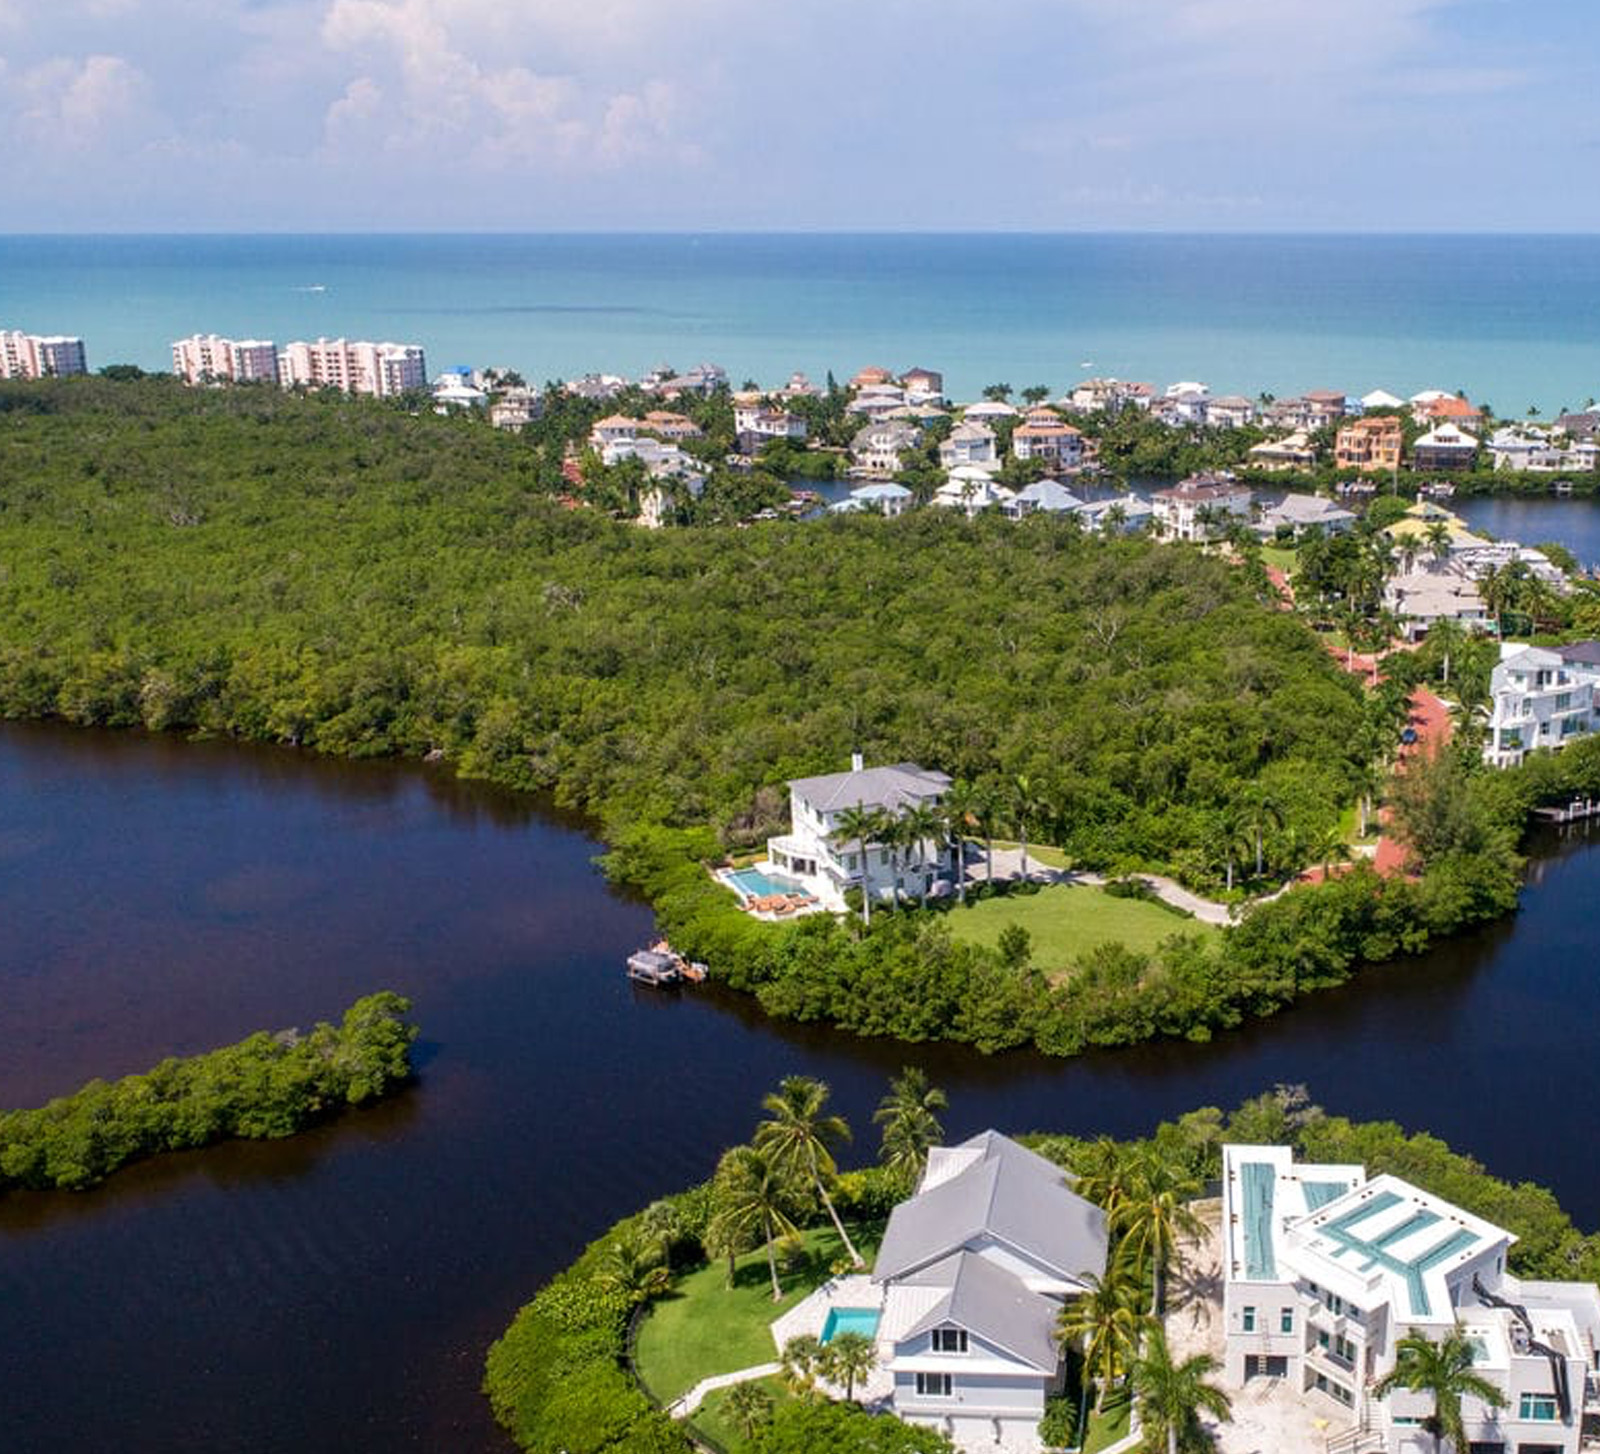 Four Things to Know Before Moving to Bonita Springs